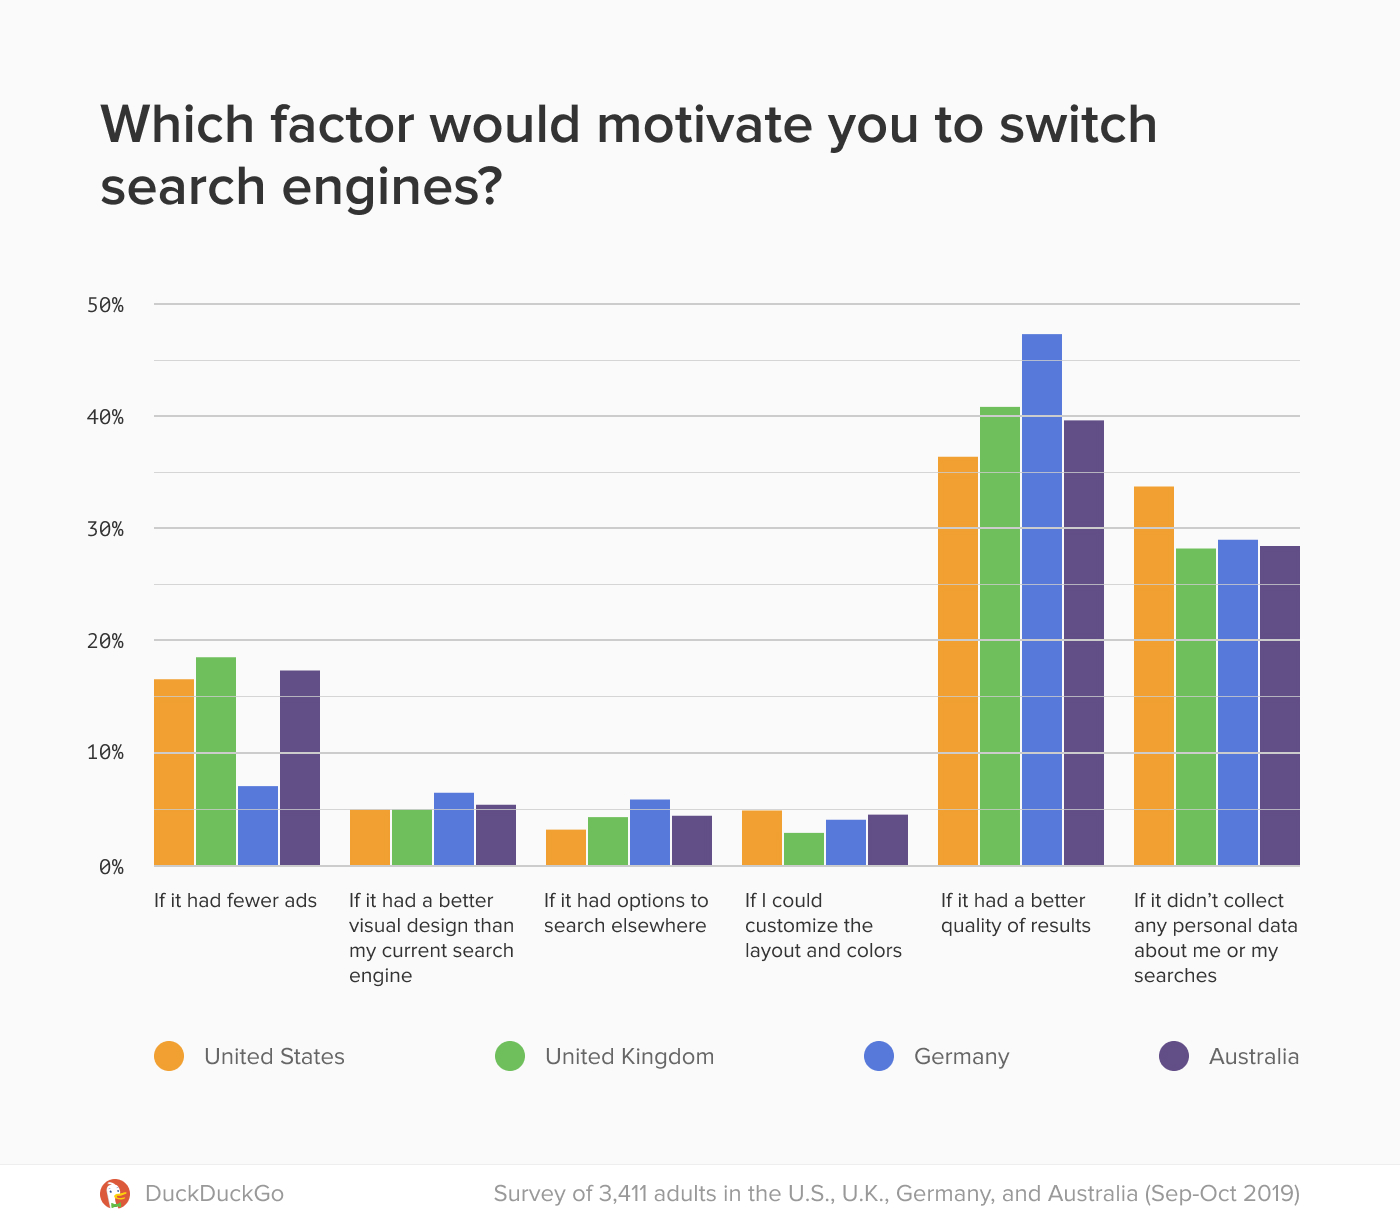 Chart showing which factors motivate users to change search engines.